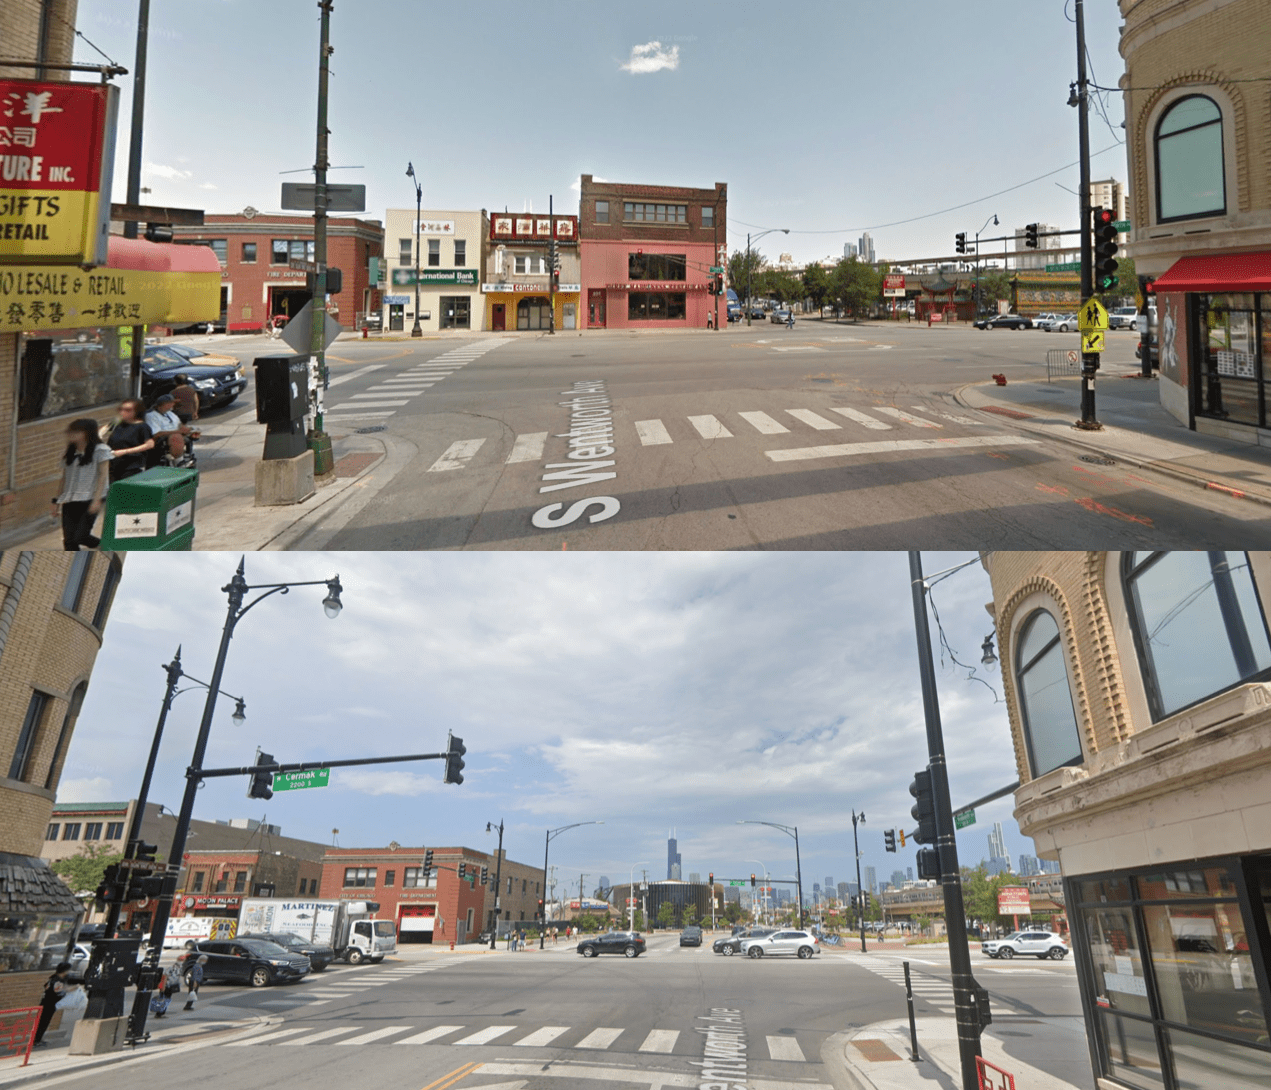 Cermak/Wentworth looking north before and after the street redesign. Images: Google Maps